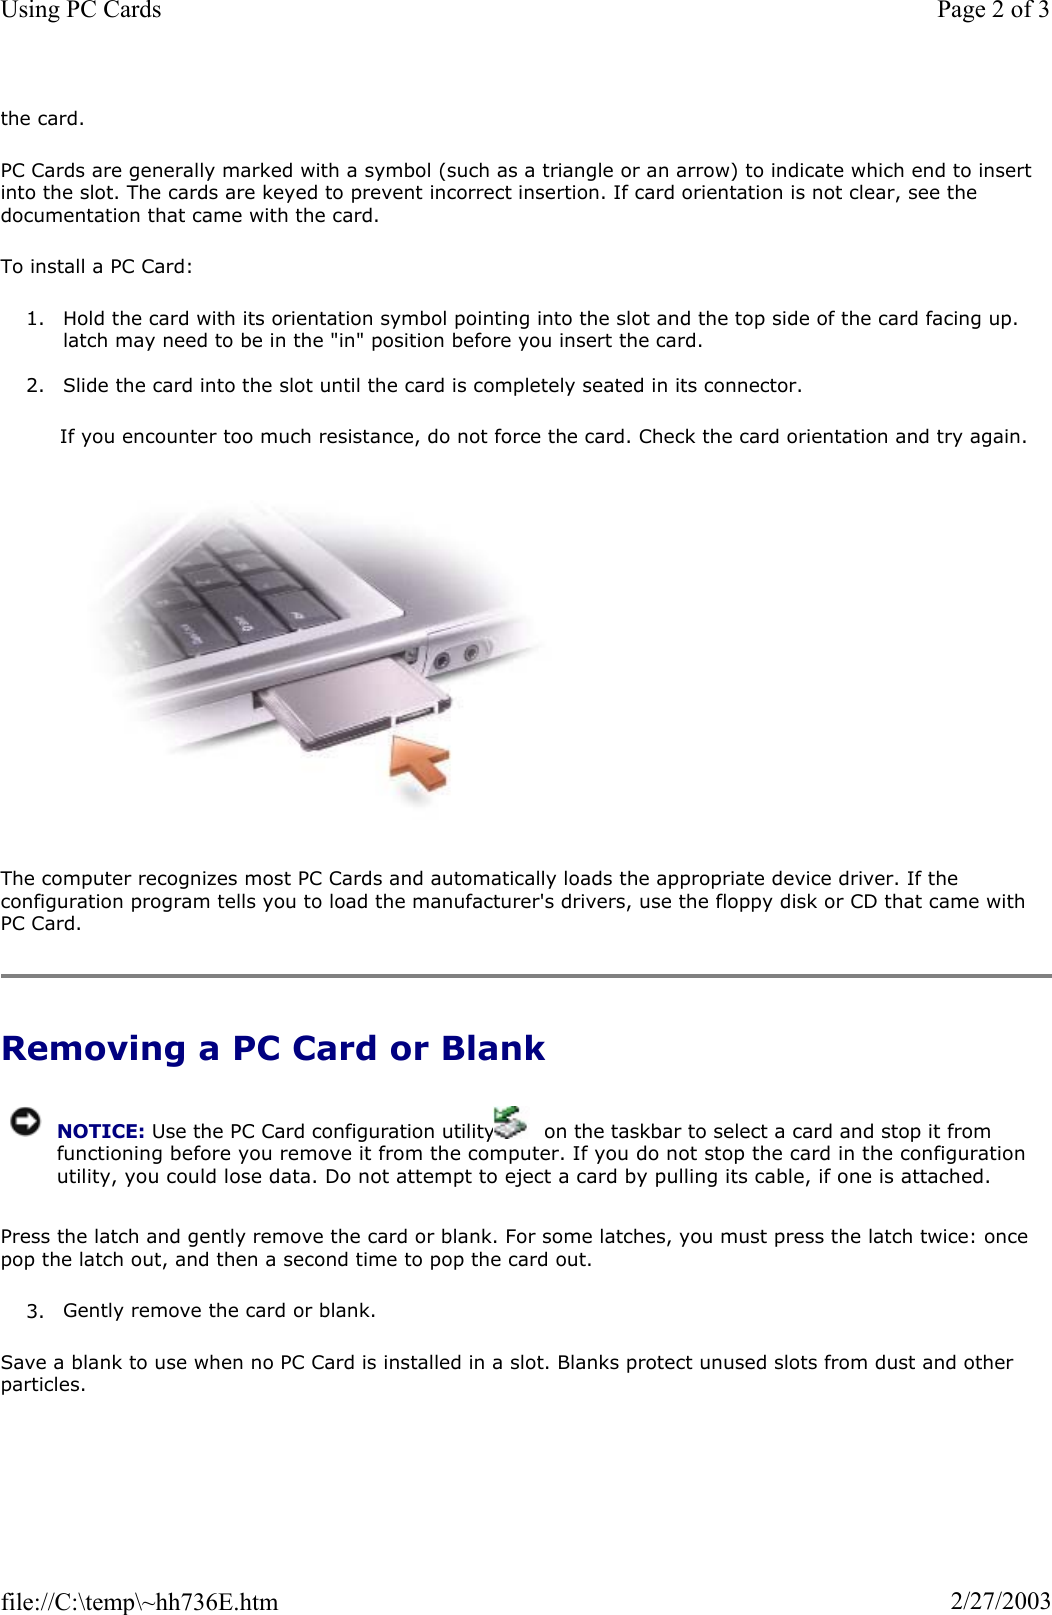 the card. PC Cards are generally marked with a symbol (such as a triangle or an arrow) to indicate which end to insert into the slot. The cards are keyed to prevent incorrect insertion. If card orientation is not clear, see the documentation that came with the card.  To install a PC Card: 1. Hold the card with its orientation symbol pointing into the slot and the top side of the card facing up. latch may need to be in the &quot;in&quot; position before you insert the card. 2. Slide the card into the slot until the card is completely seated in its connector.  If you encounter too much resistance, do not force the card. Check the card orientation and try again.  The computer recognizes most PC Cards and automatically loads the appropriate device driver. If the configuration program tells you to load the manufacturer&apos;s drivers, use the floppy disk or CD that came with PC Card. Removing a PC Card or Blank Press the latch and gently remove the card or blank. For some latches, you must press the latch twice: once pop the latch out, and then a second time to pop the card out. 3. Gently remove the card or blank. Save a blank to use when no PC Card is installed in a slot. Blanks protect unused slots from dust and other particles. NOTICE: Use the PC Card configuration utility   on the taskbar to select a card and stop it from functioning before you remove it from the computer. If you do not stop the card in the configuration utility, you could lose data. Do not attempt to eject a card by pulling its cable, if one is attached.Page 2 of 3Using PC Cards2/27/2003file://C:\temp\~hh736E.htm